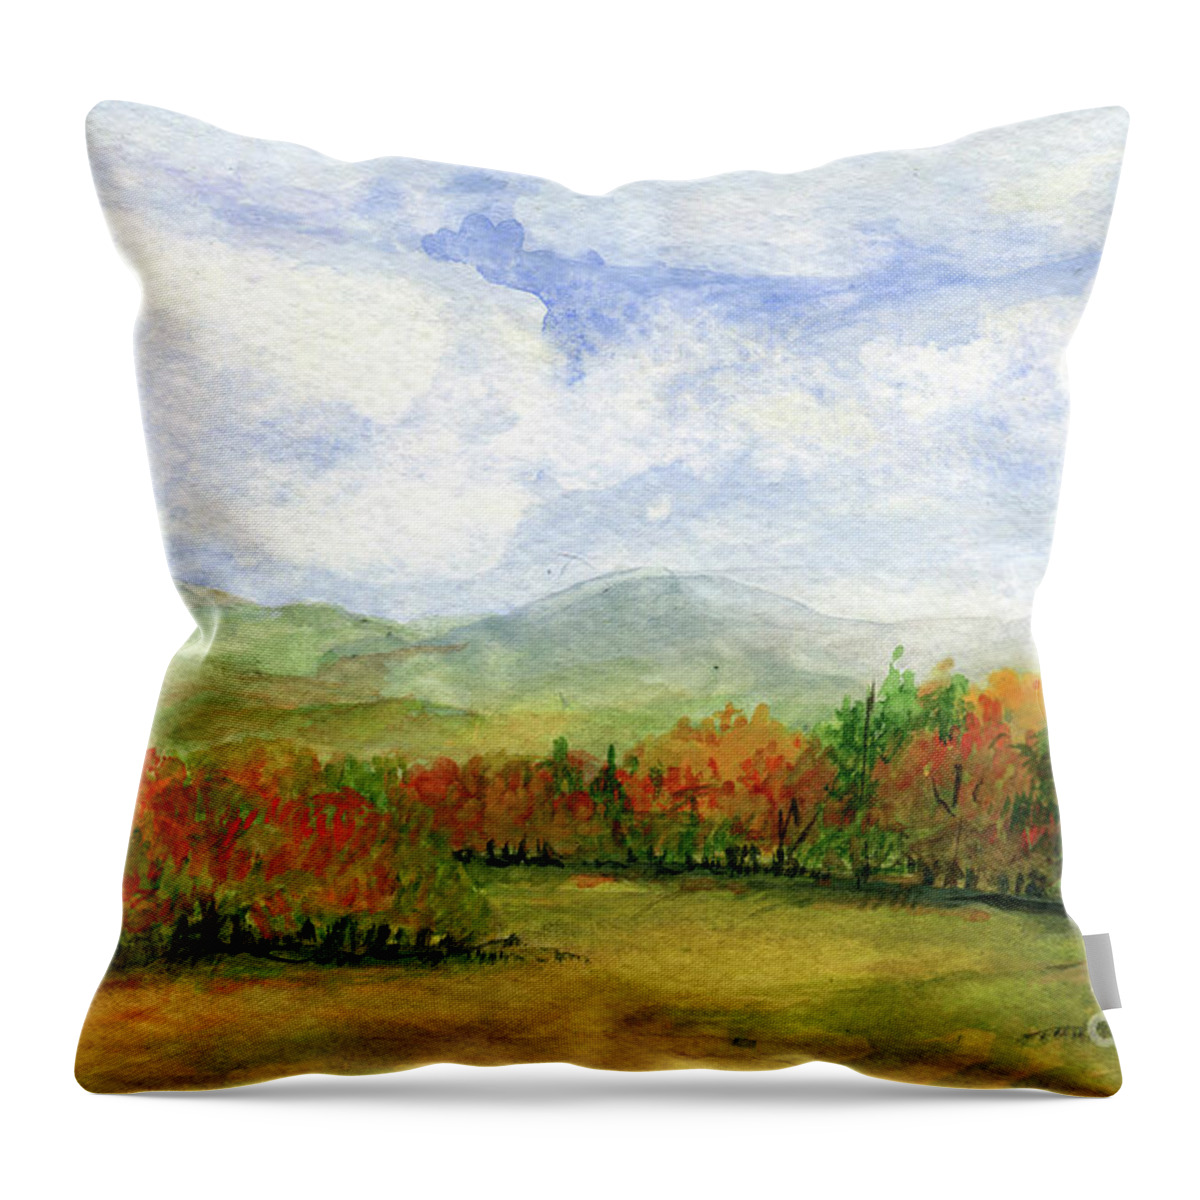 Autumn Throw Pillow featuring the painting Autumn Day Watercolor Vermont Landscape by Laurie Rohner